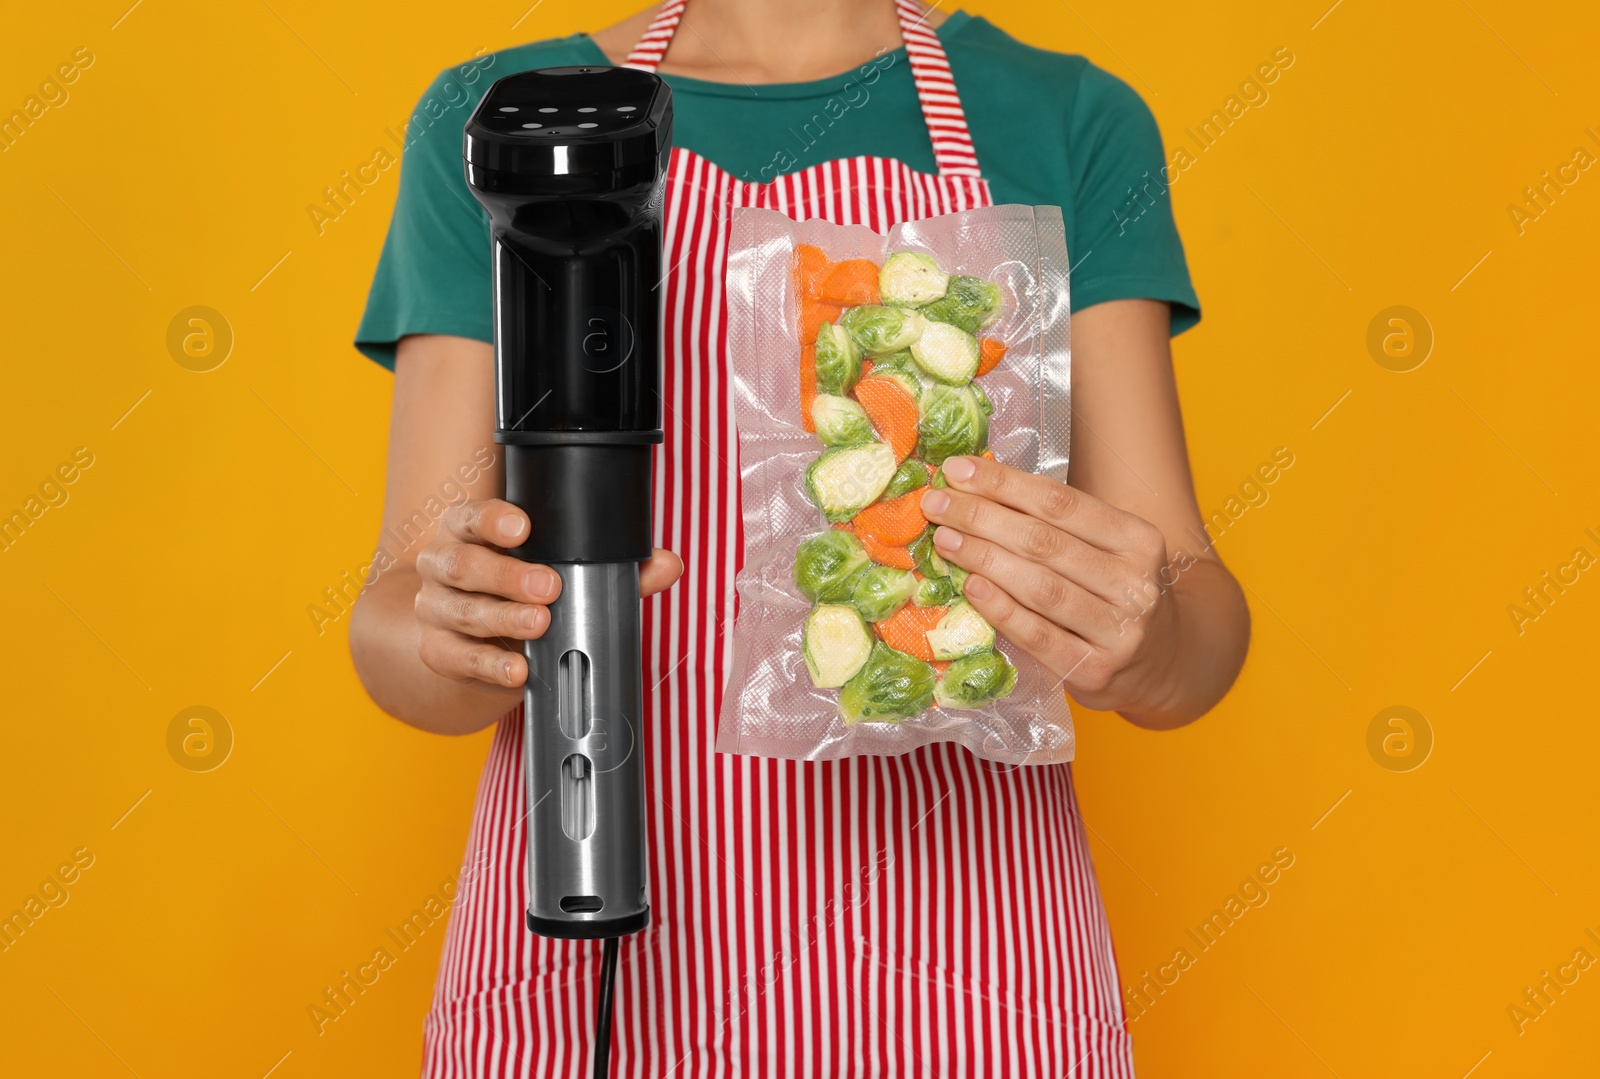 Photo of Woman holding sous vide cooker and vegetables in vacuum pack on orange background, closeup